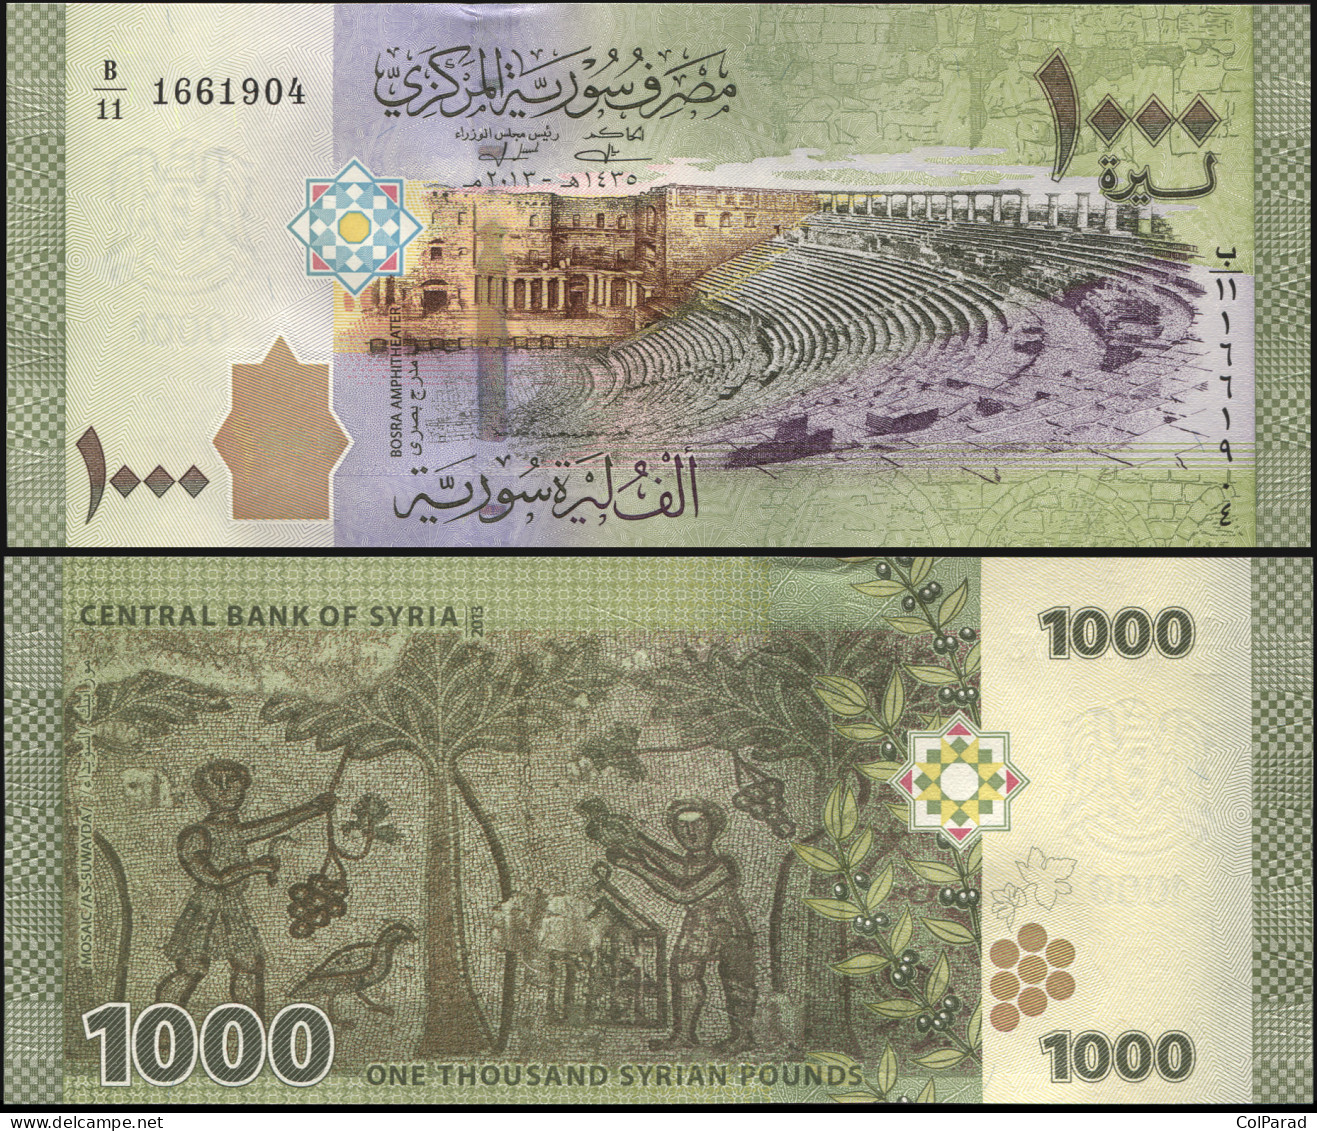 SYRIA 1000 SYRIAN POUNDS - 2013 (2015) - Paper Unc - P.116a Banknote - Syria